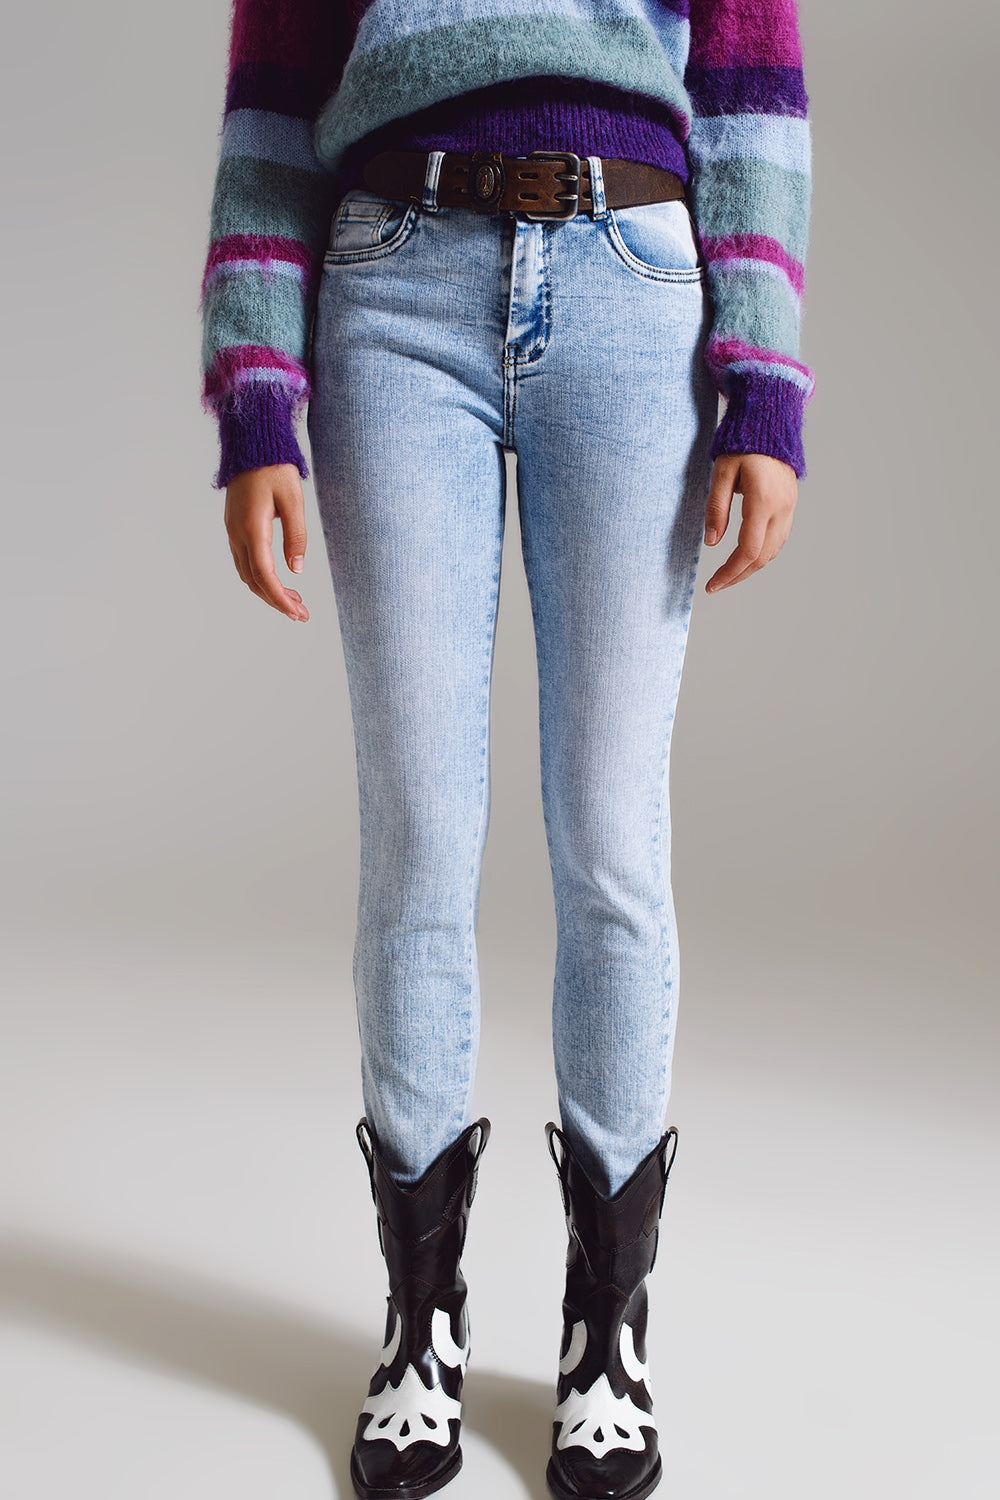 Q2 Super skinny jeans in mid rise in light blue wash